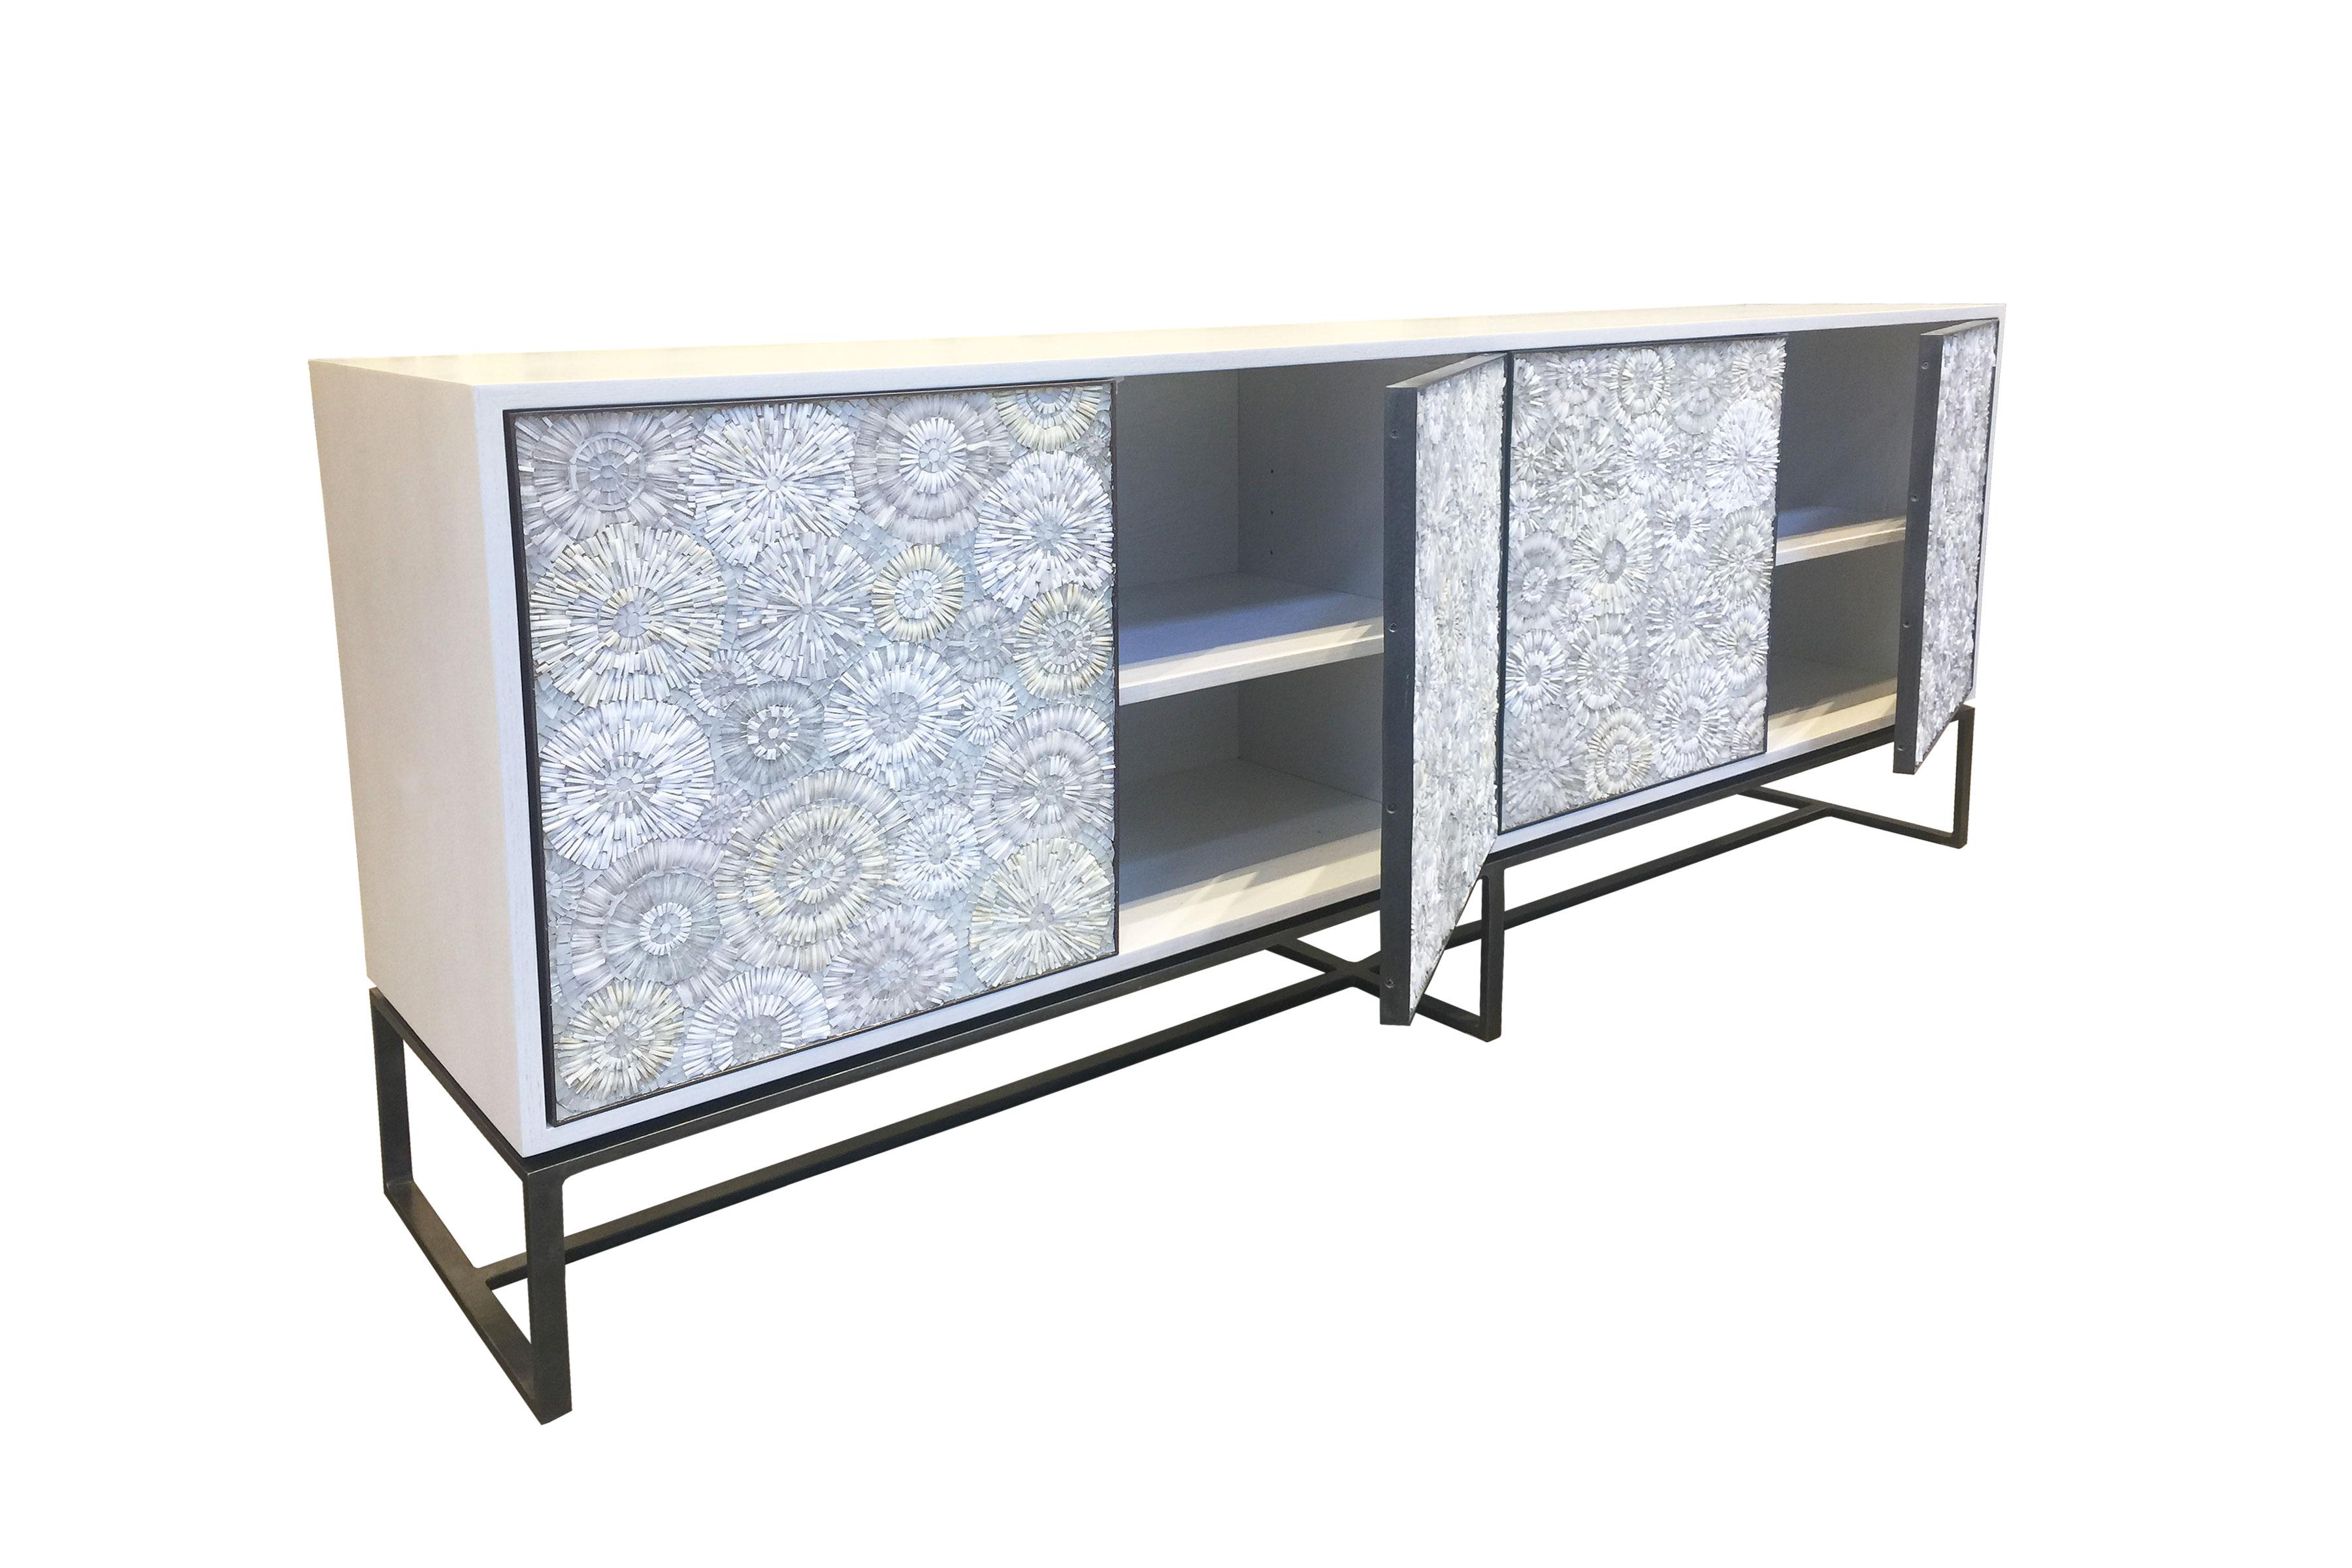 The Blossom serving buffet by Ercole Home has a 4-door front, with hand-hammered metal base and door frames in bronze finish. 
Handcut glass mosaic in variety shades of white and ivory decorate the surface in Blossom mosaic pattern.
Washed White